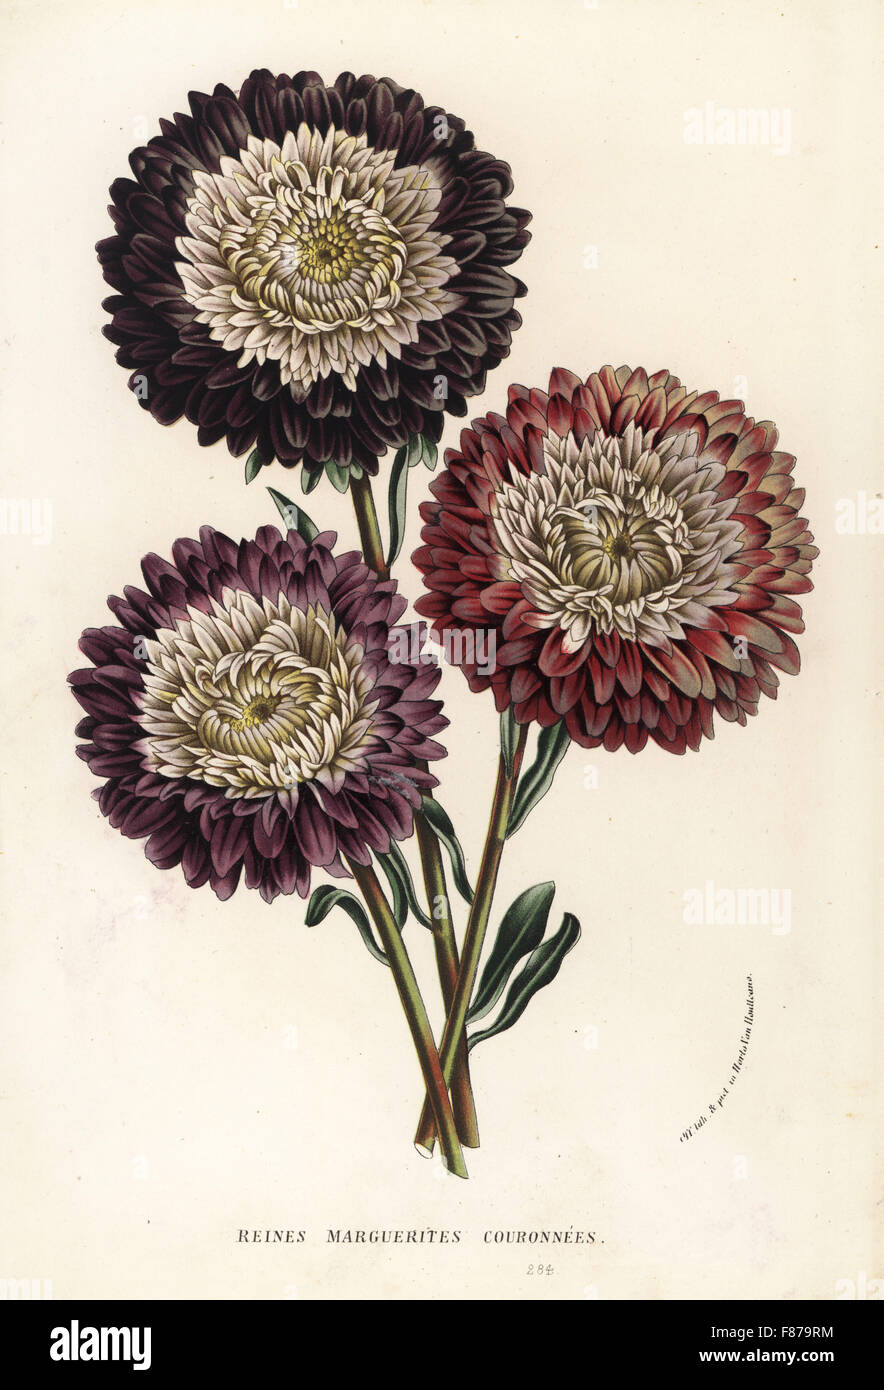 China aster cultivars, Callistephus chinensis. Handcoloured lithograph from Louis van Houtte and Charles Lemaire's Flowers of the Gardens and Hothouses of Europe, Flore des Serres et des Jardins de l'Europe, Ghent, Belgium, 1862-65. Stock Photo